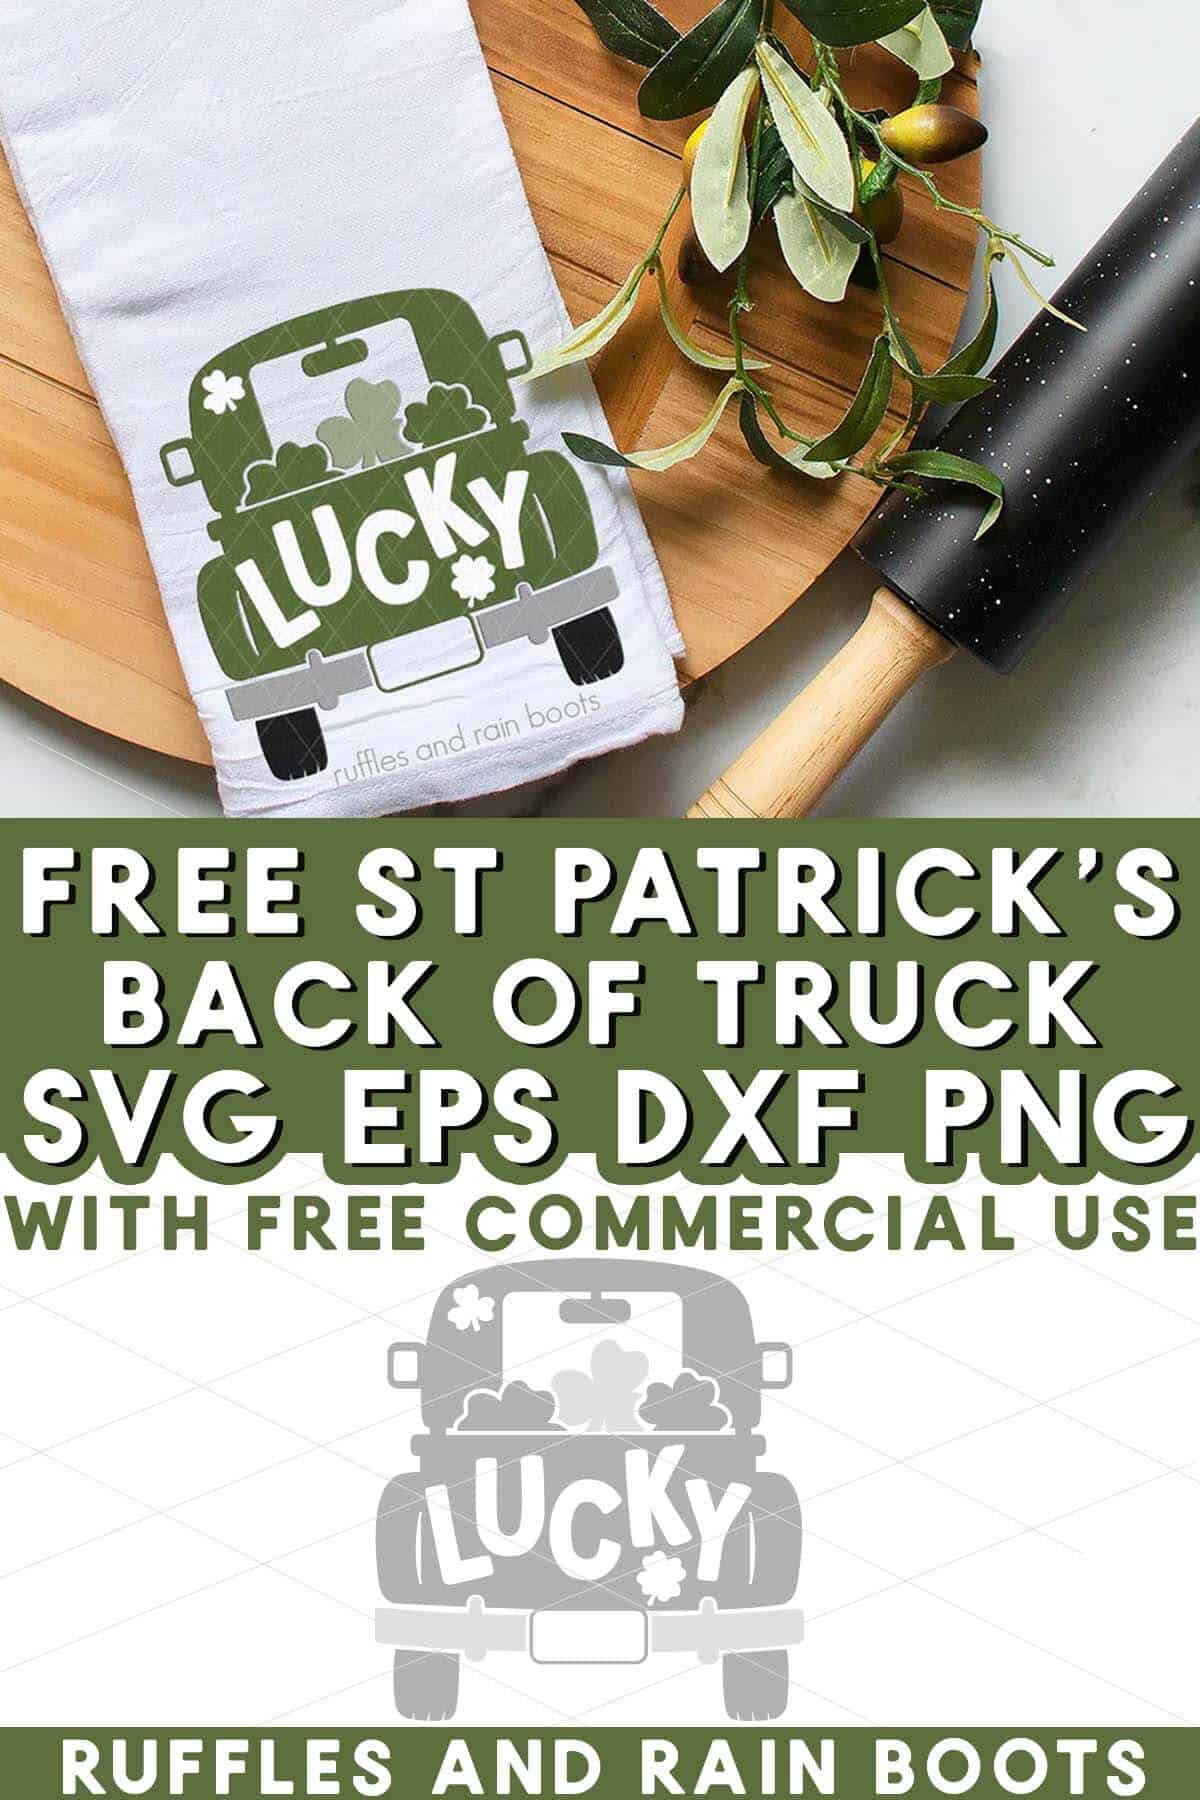 Split vertical image showing a kitchen towel for St Patricks Day with free lucky truck SVG with shamrocks.